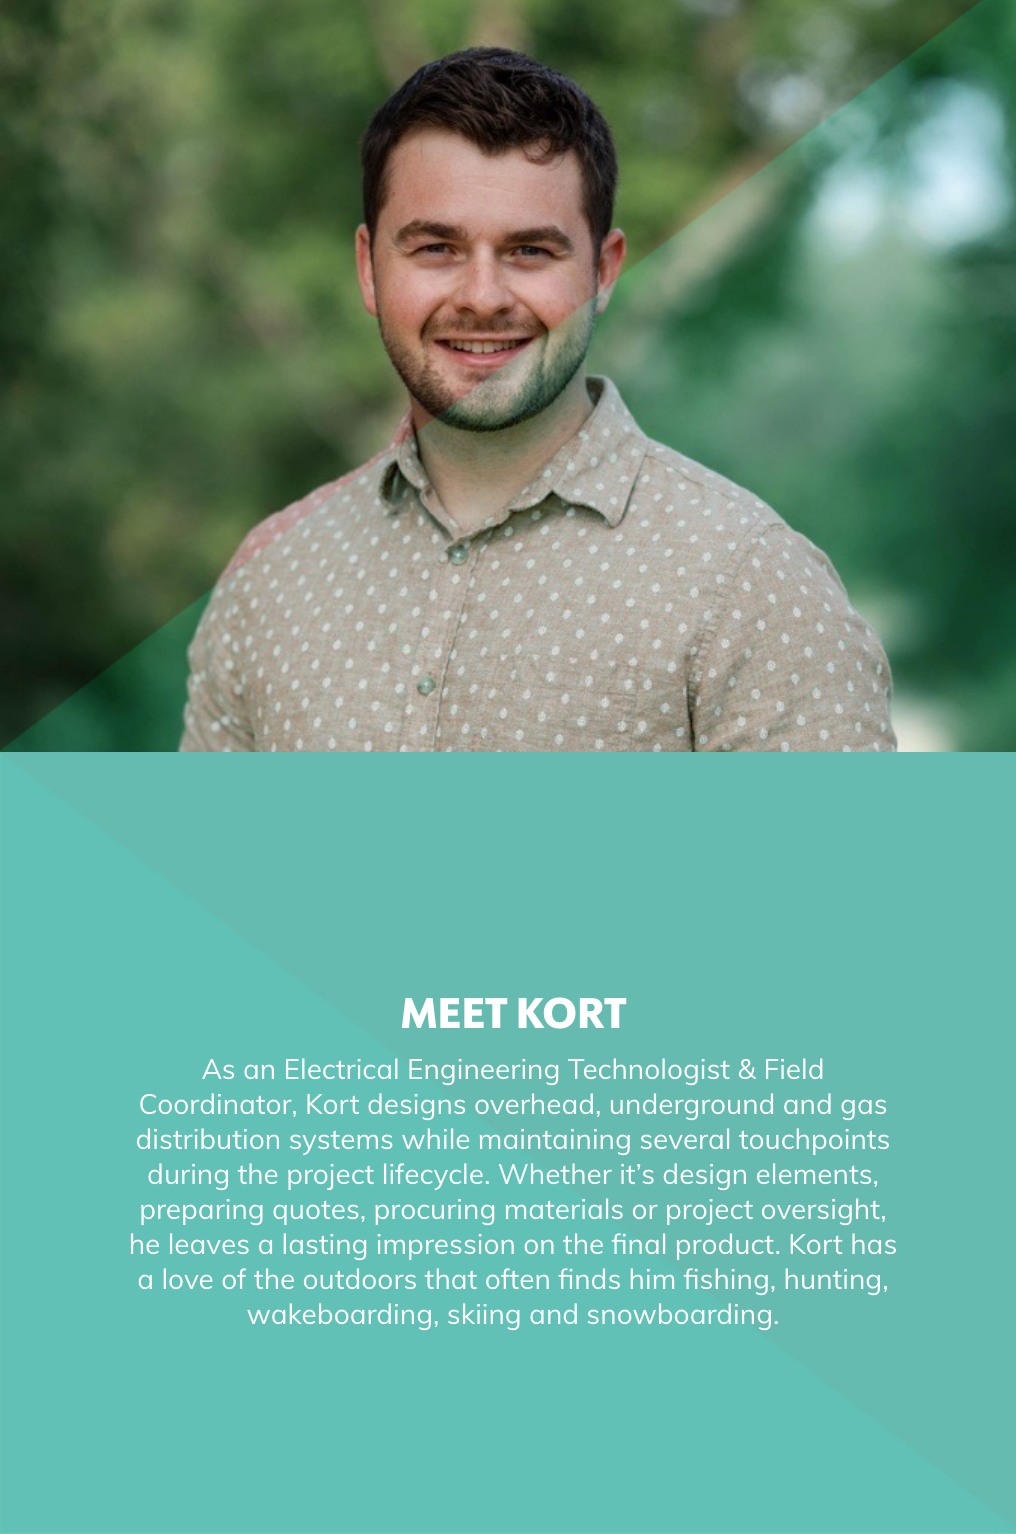 As an Electrical Engineering Technologist & Field Coordinator, Kort designs overhead, underground and gas distribution systems while maintaining several touchpoints during the project lifecycle. Whether it’s design elements, preparing quotes, procuring materials or project oversight, he leaves a lasting impression on the final product. Kort has a love of the outdoors that often finds him fishing, hunting, wakeboarding, skiing and snowboarding.